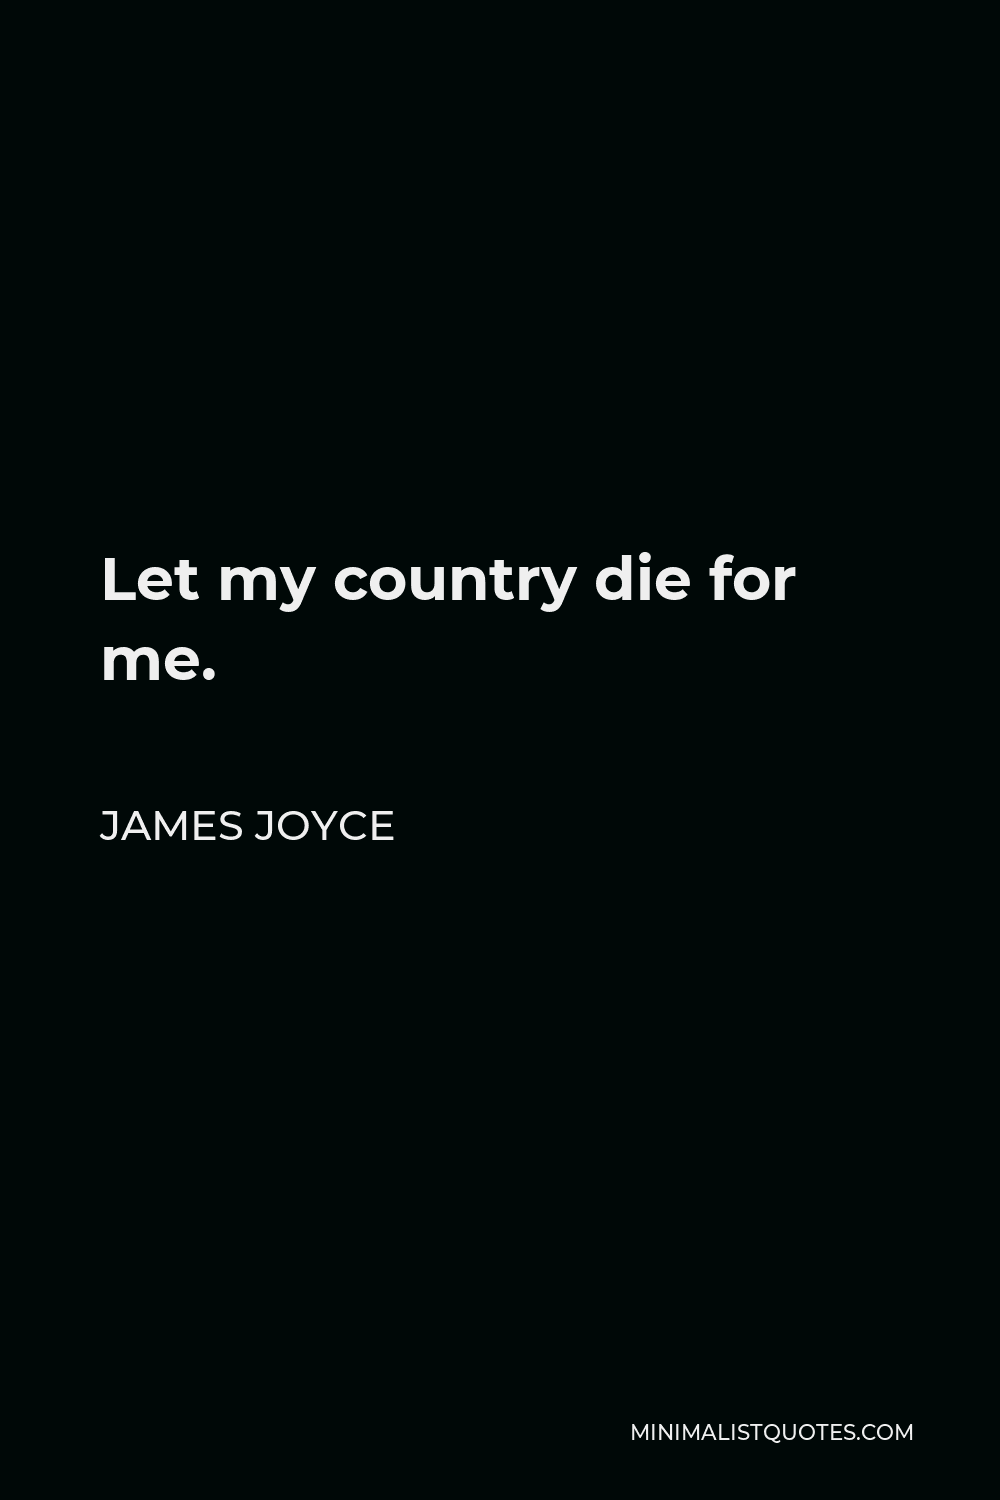 James Joyce Quote - Let my country die for me.